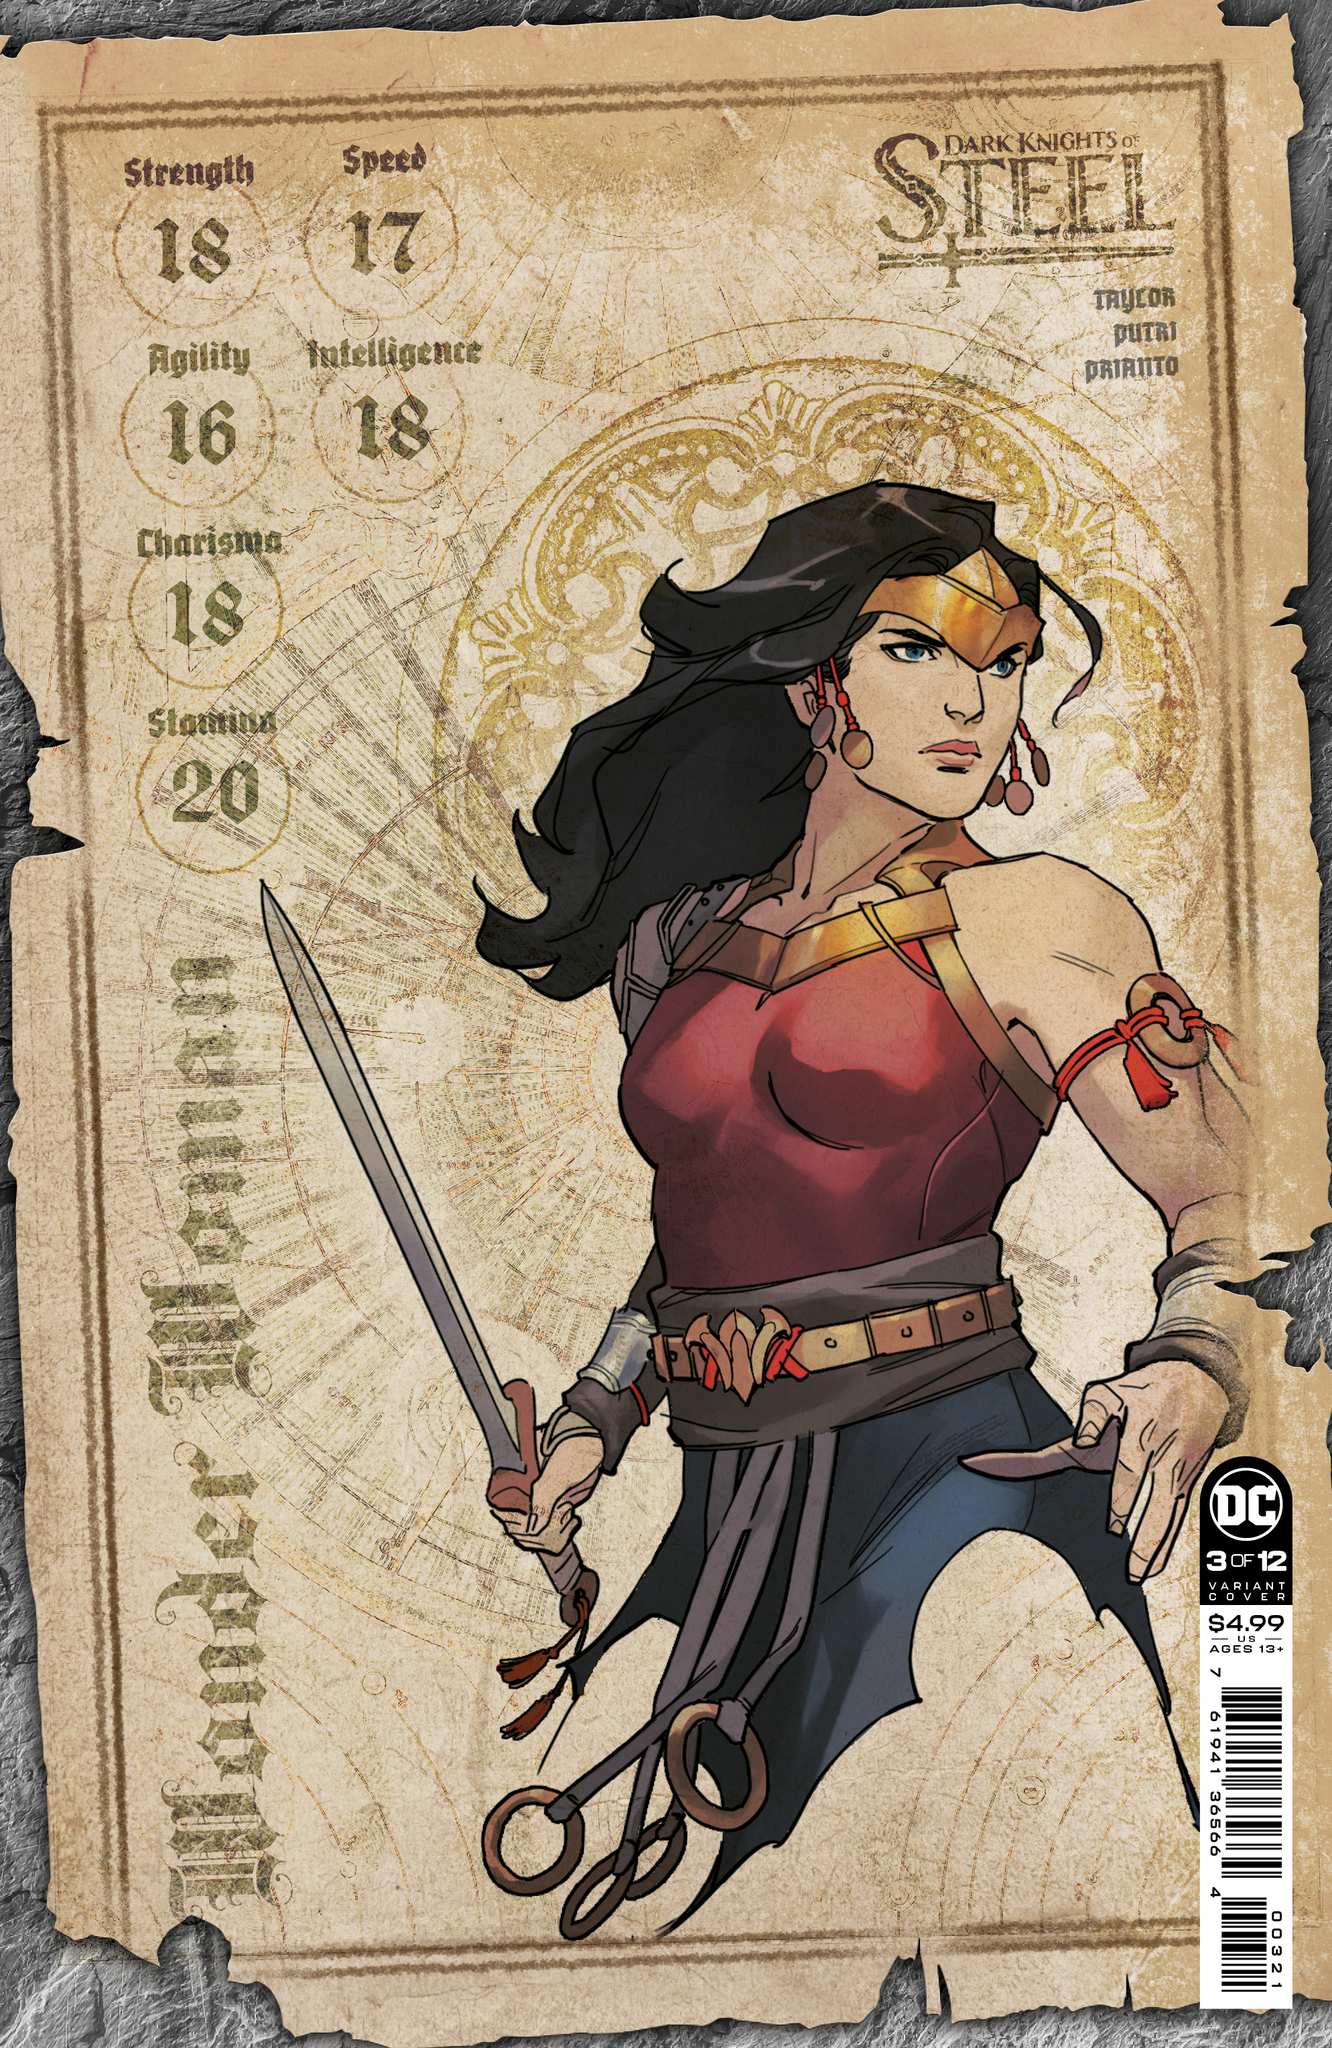 Dark Knights of Steel #3 (Of 12) Cover C Incentive 1 For 25 Yasmine Putri Character Sheet Card Stock Variant